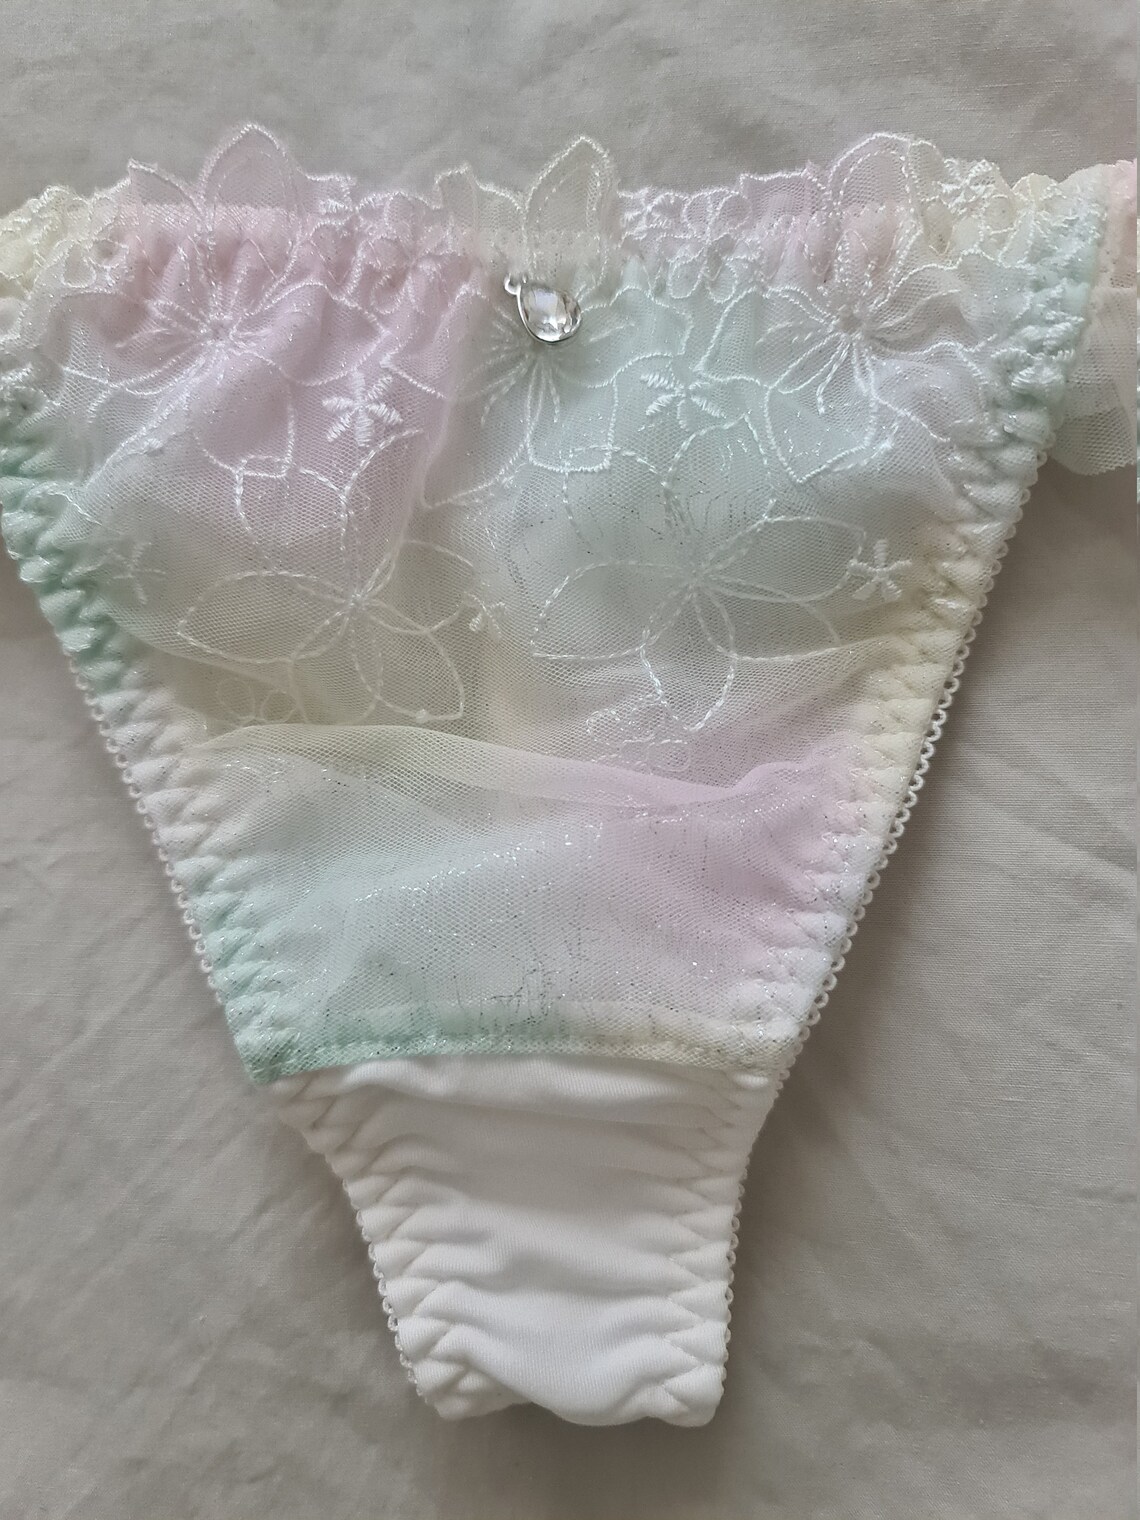 Silky Thong Flutter Panties from Japan size 10 Aus/UK & 5/US | Etsy